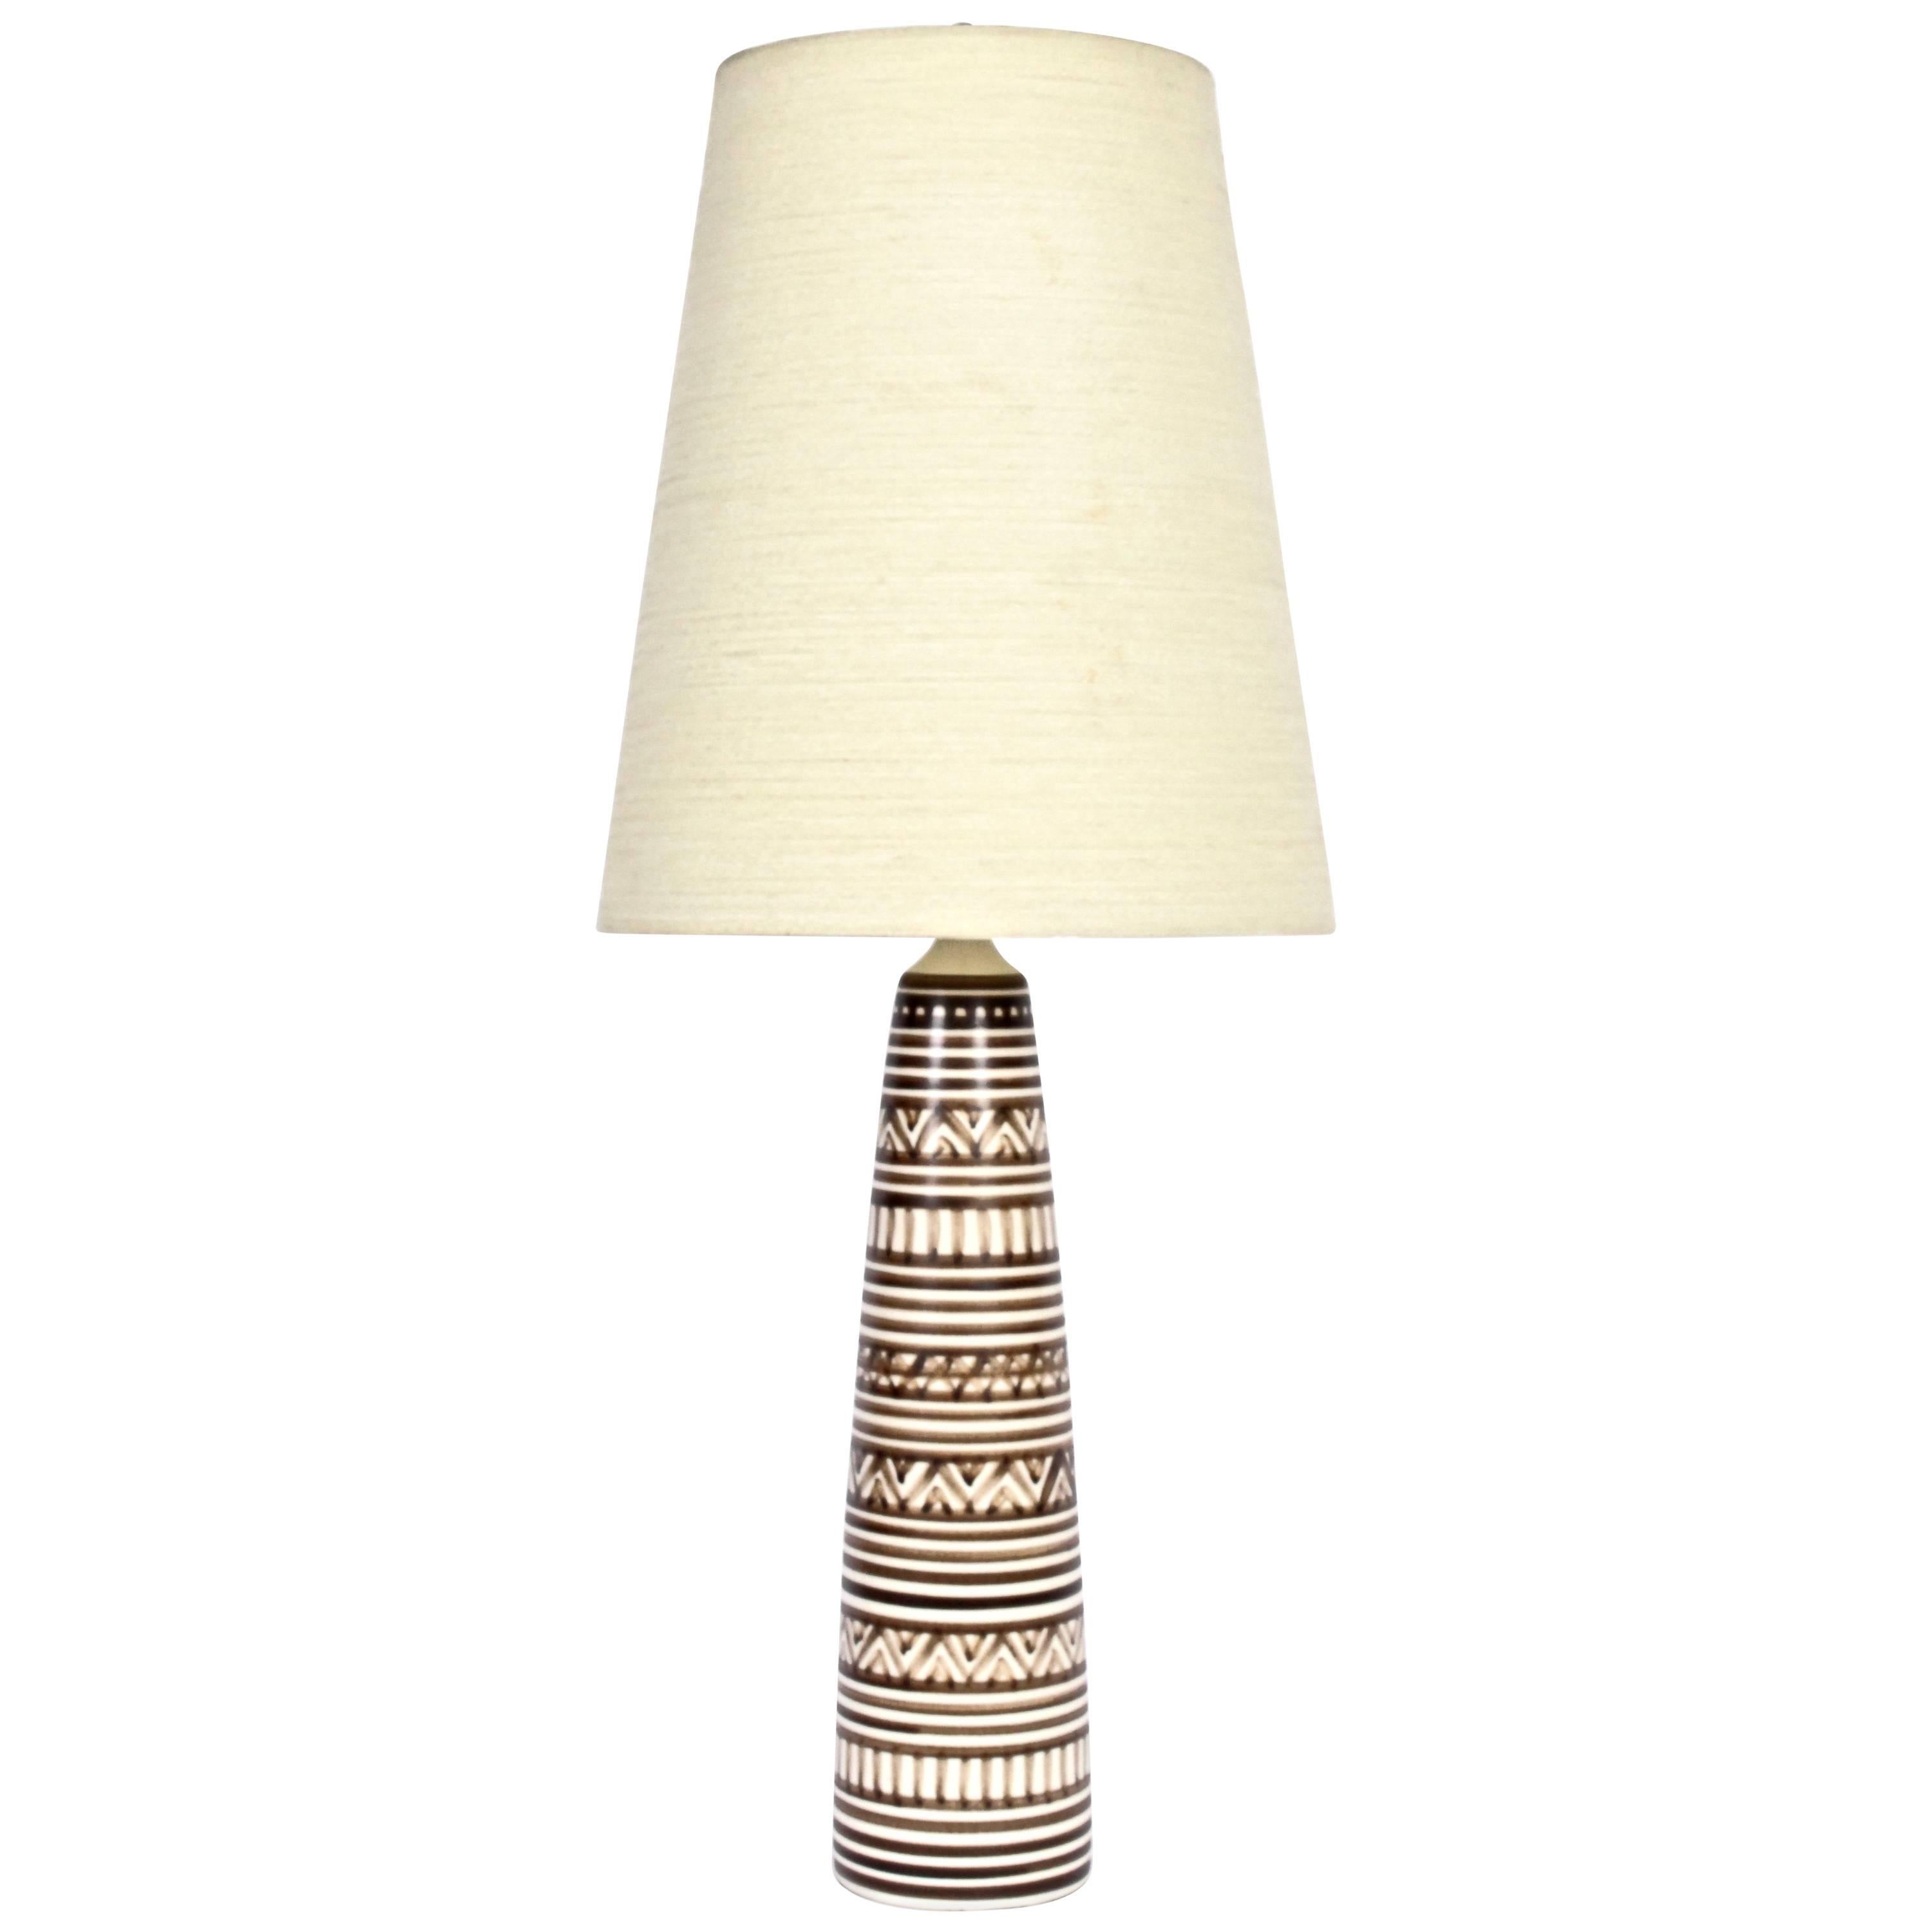 Tall Lotte and Gunnar Bostlund "Tribal" Pottery Table Lamp, 1960's